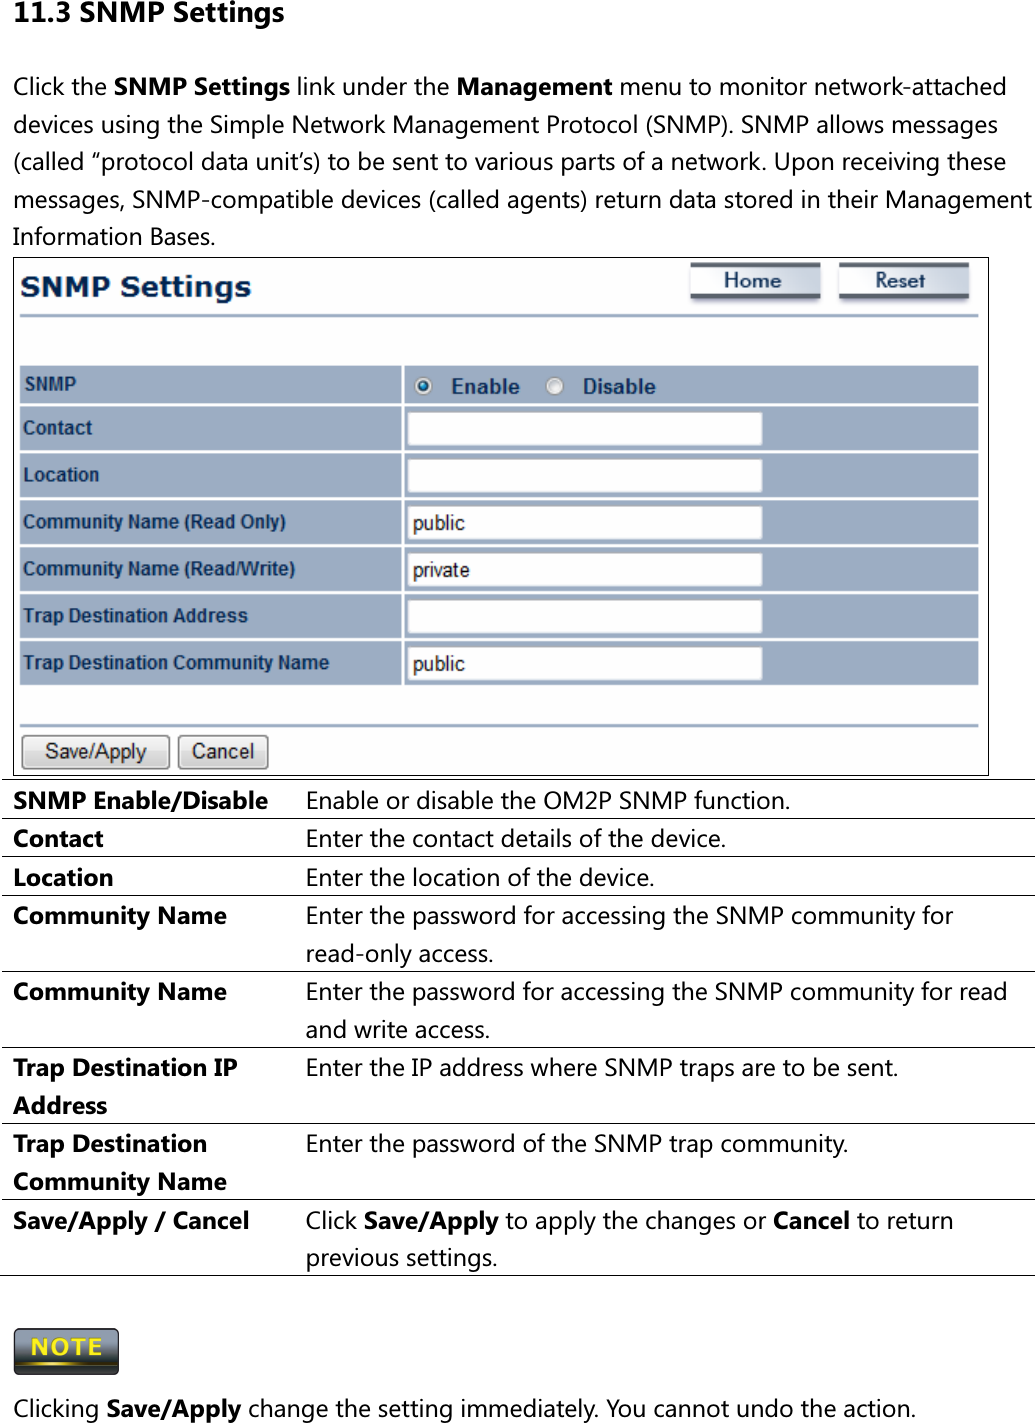 11.3 SNMP Settings Click the SNMP Settings link under the Management menu to monitor network-attached devices using the Simple Network Management Protocol (SNMP). SNMP allows messages (called “protocol data unit’s) to be sent to various parts of a network. Upon receiving these messages, SNMP-compatible devices (called agents) return data stored in their Management Information Bases.  SNMP Enable/Disable  Enable or disable the OM2P SNMP function. Contact  Enter the contact details of the device. Location  Enter the location of the device. Community Name  Enter the password for accessing the SNMP community for read-only access. Community Name  Enter the password for accessing the SNMP community for read and write access. Trap Destination IP Address Enter the IP address where SNMP traps are to be sent. Trap Destination Community Name Enter the password of the SNMP trap community. Save/Apply / Cancel  Click Save/Apply to apply the changes or Cancel to return previous settings.   Clicking Save/Apply change the setting immediately. You cannot undo the action. 